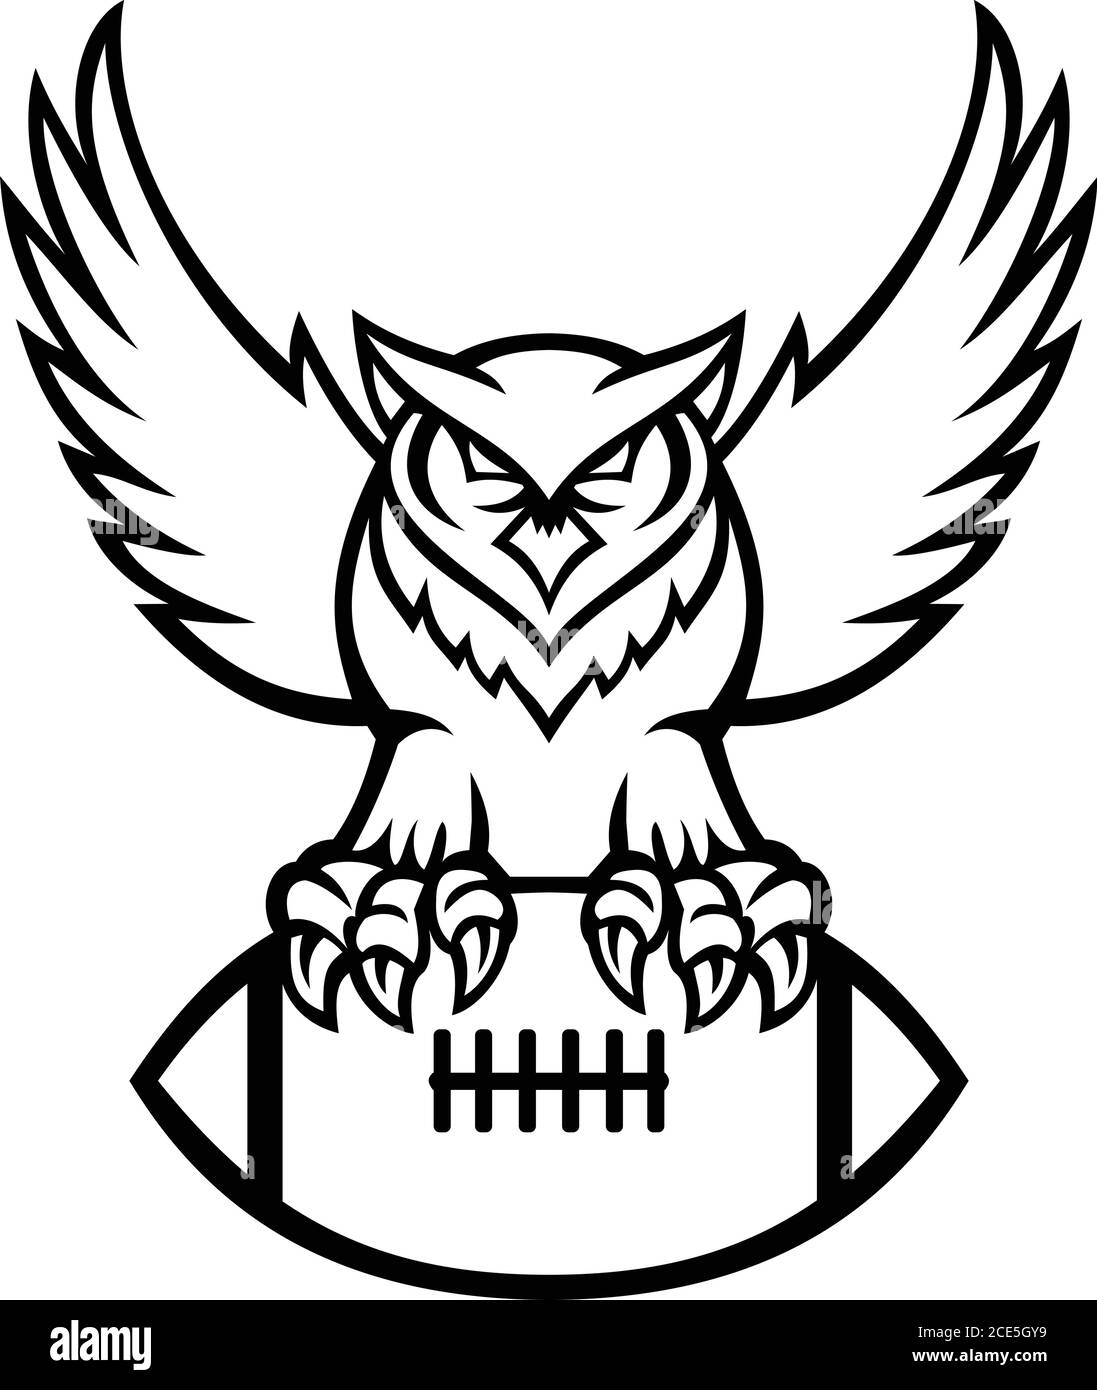 Mascot illustration of a great horned owl, tiger owl or hoot owl, a large owl native to the Americas, clutching an American football ball viewed from Stock Vector